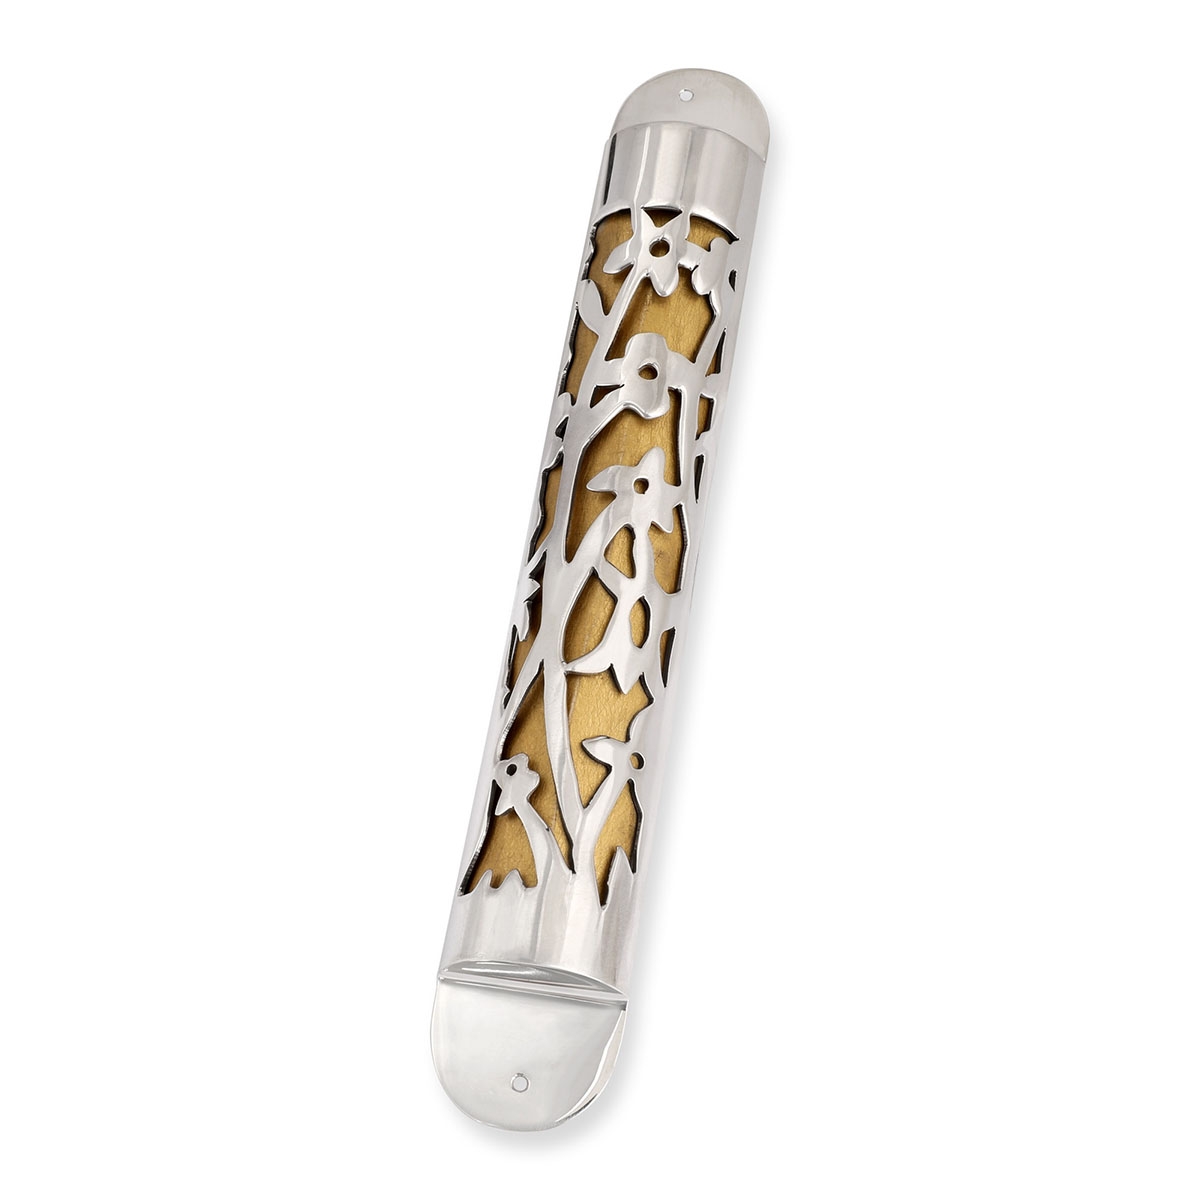 Bier Judaica Handcrafted Sterling Silver Mezuzah Case With Floral Cut-Out Design (Choice of Colors) - 1